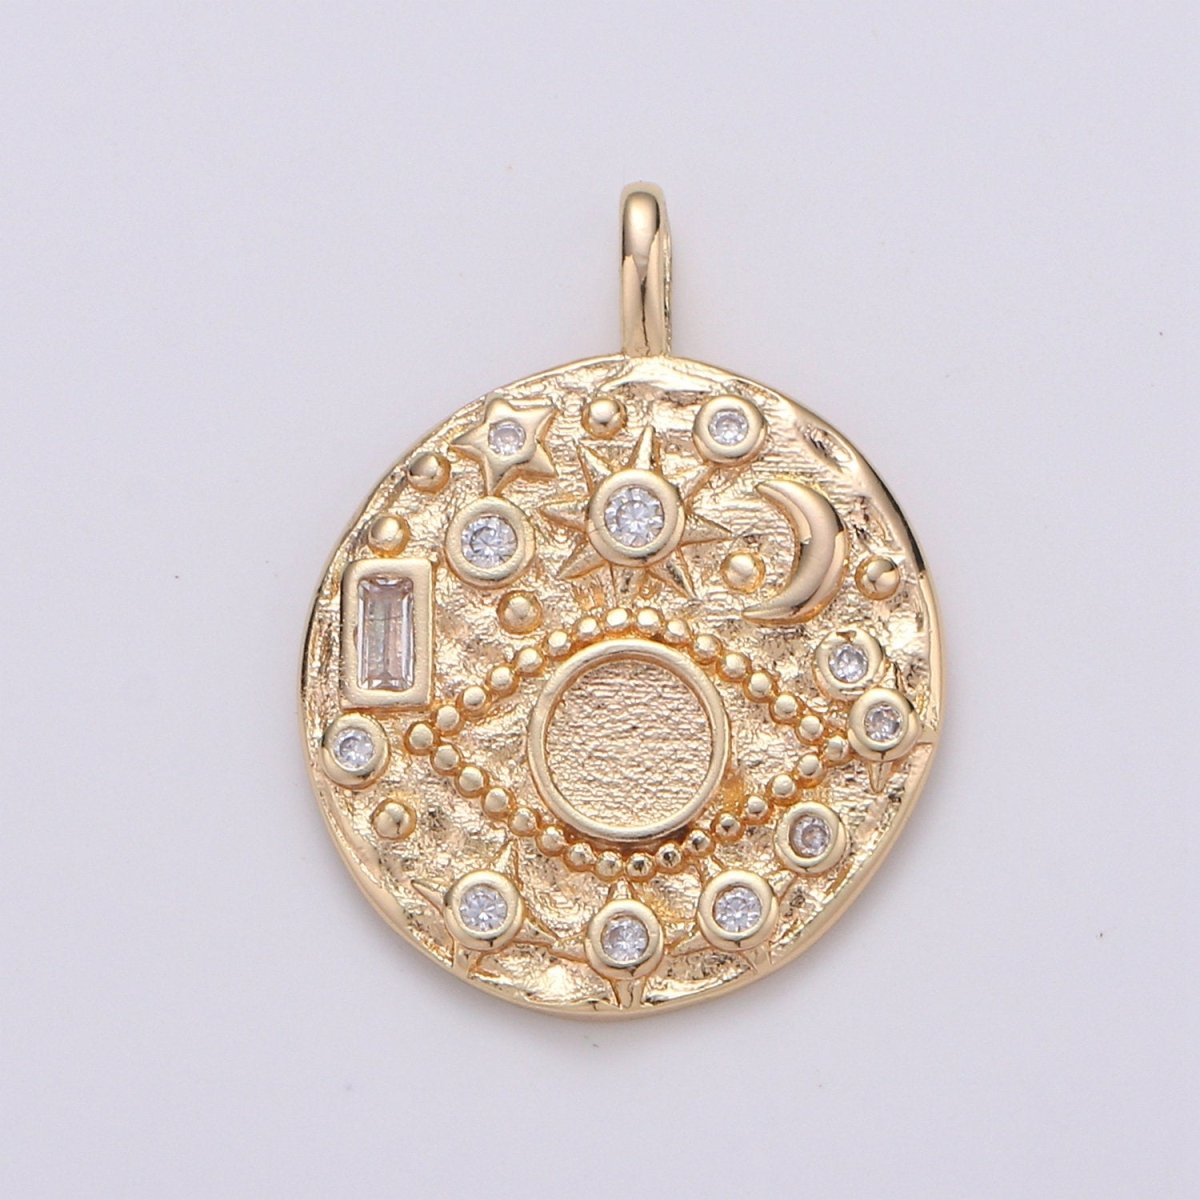 14K Gold Filled Rustic Dainty Evil Eye Charm with Micro Pave Cubic Zirconia CZ Stone for Celestial Moon Necklace or Earring Supply D-219 to D-220 - DLUXCA